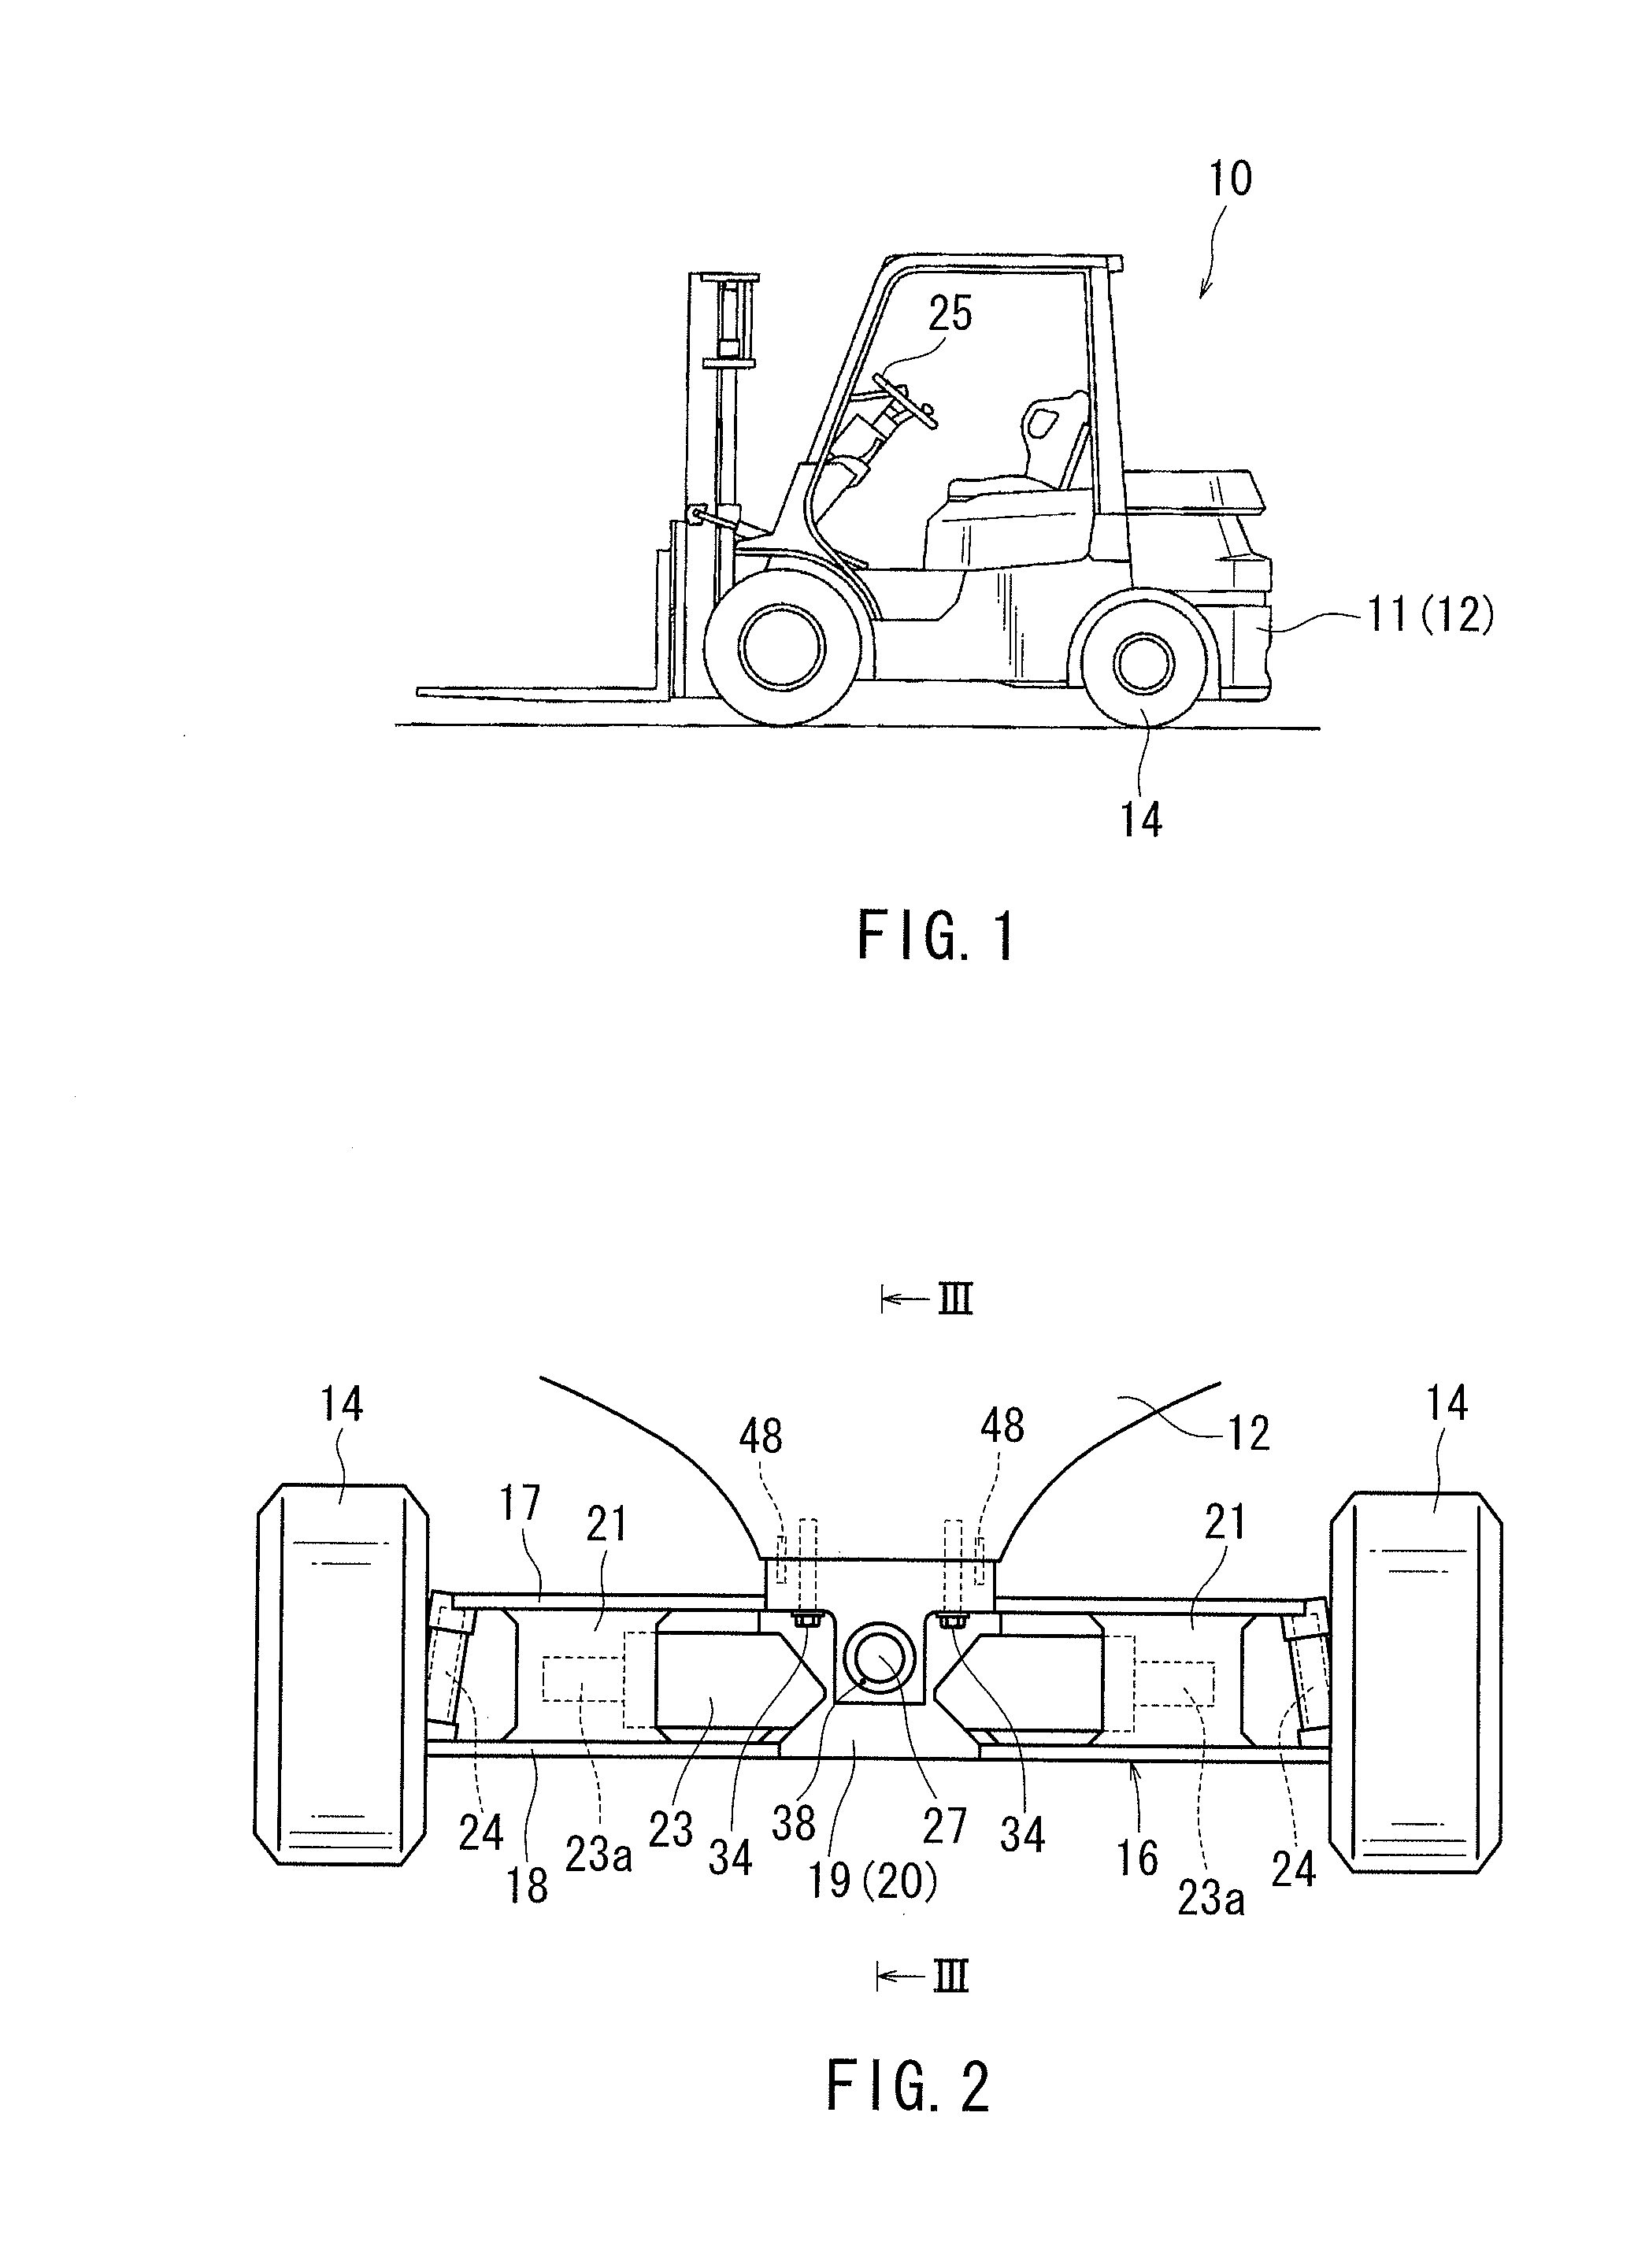 Axle support structures for industrial vehicles